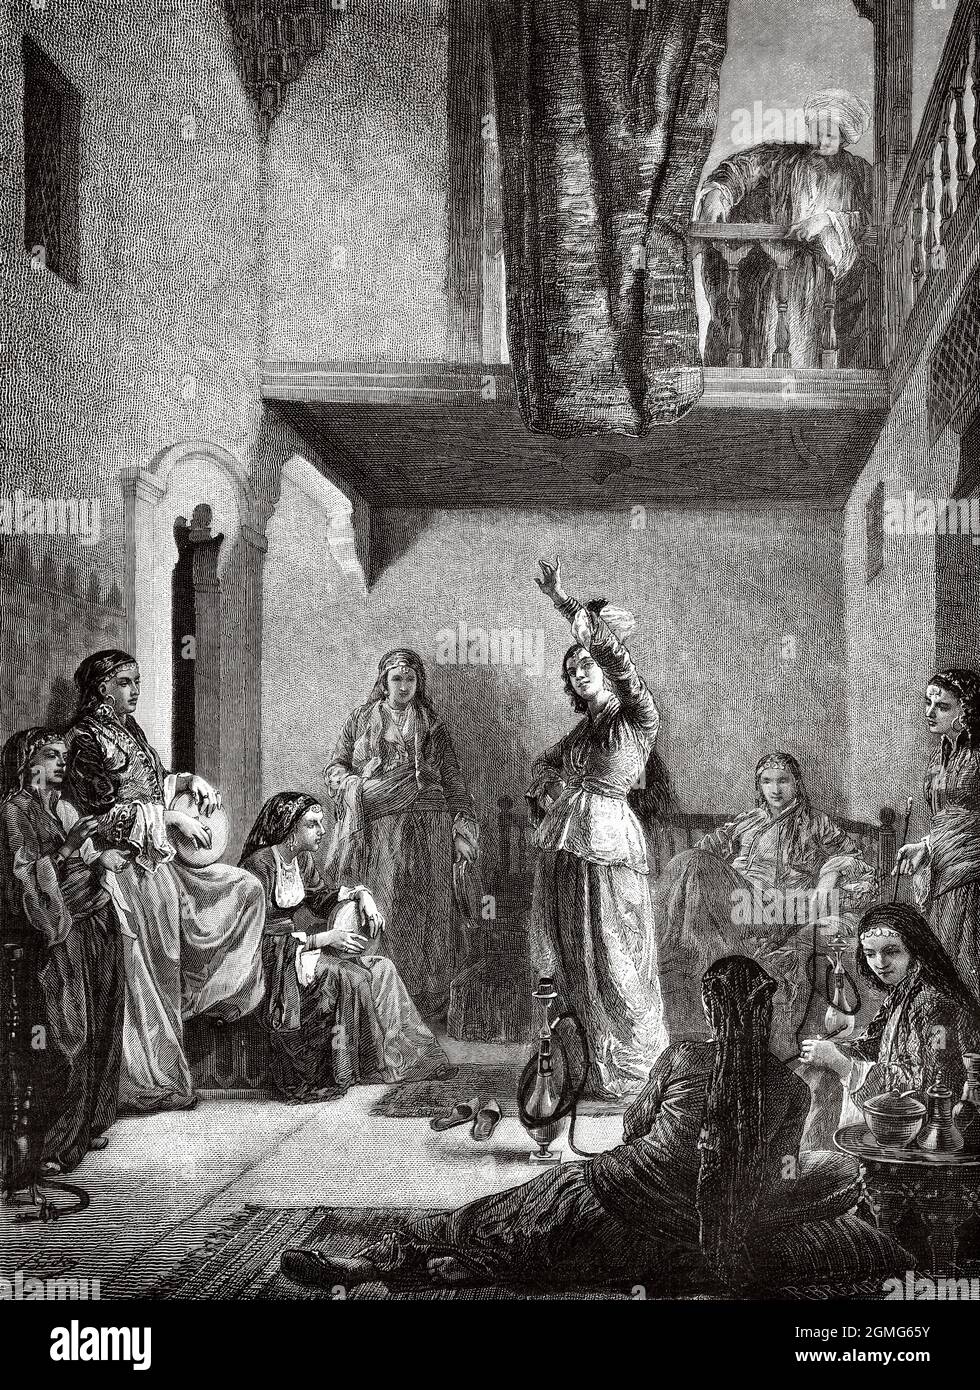 Life in an Ottoman harem, painting by A Bida. Old 19th century engraved  illustration from La Ilustración Artística 1882 Stock Photo - Alamy